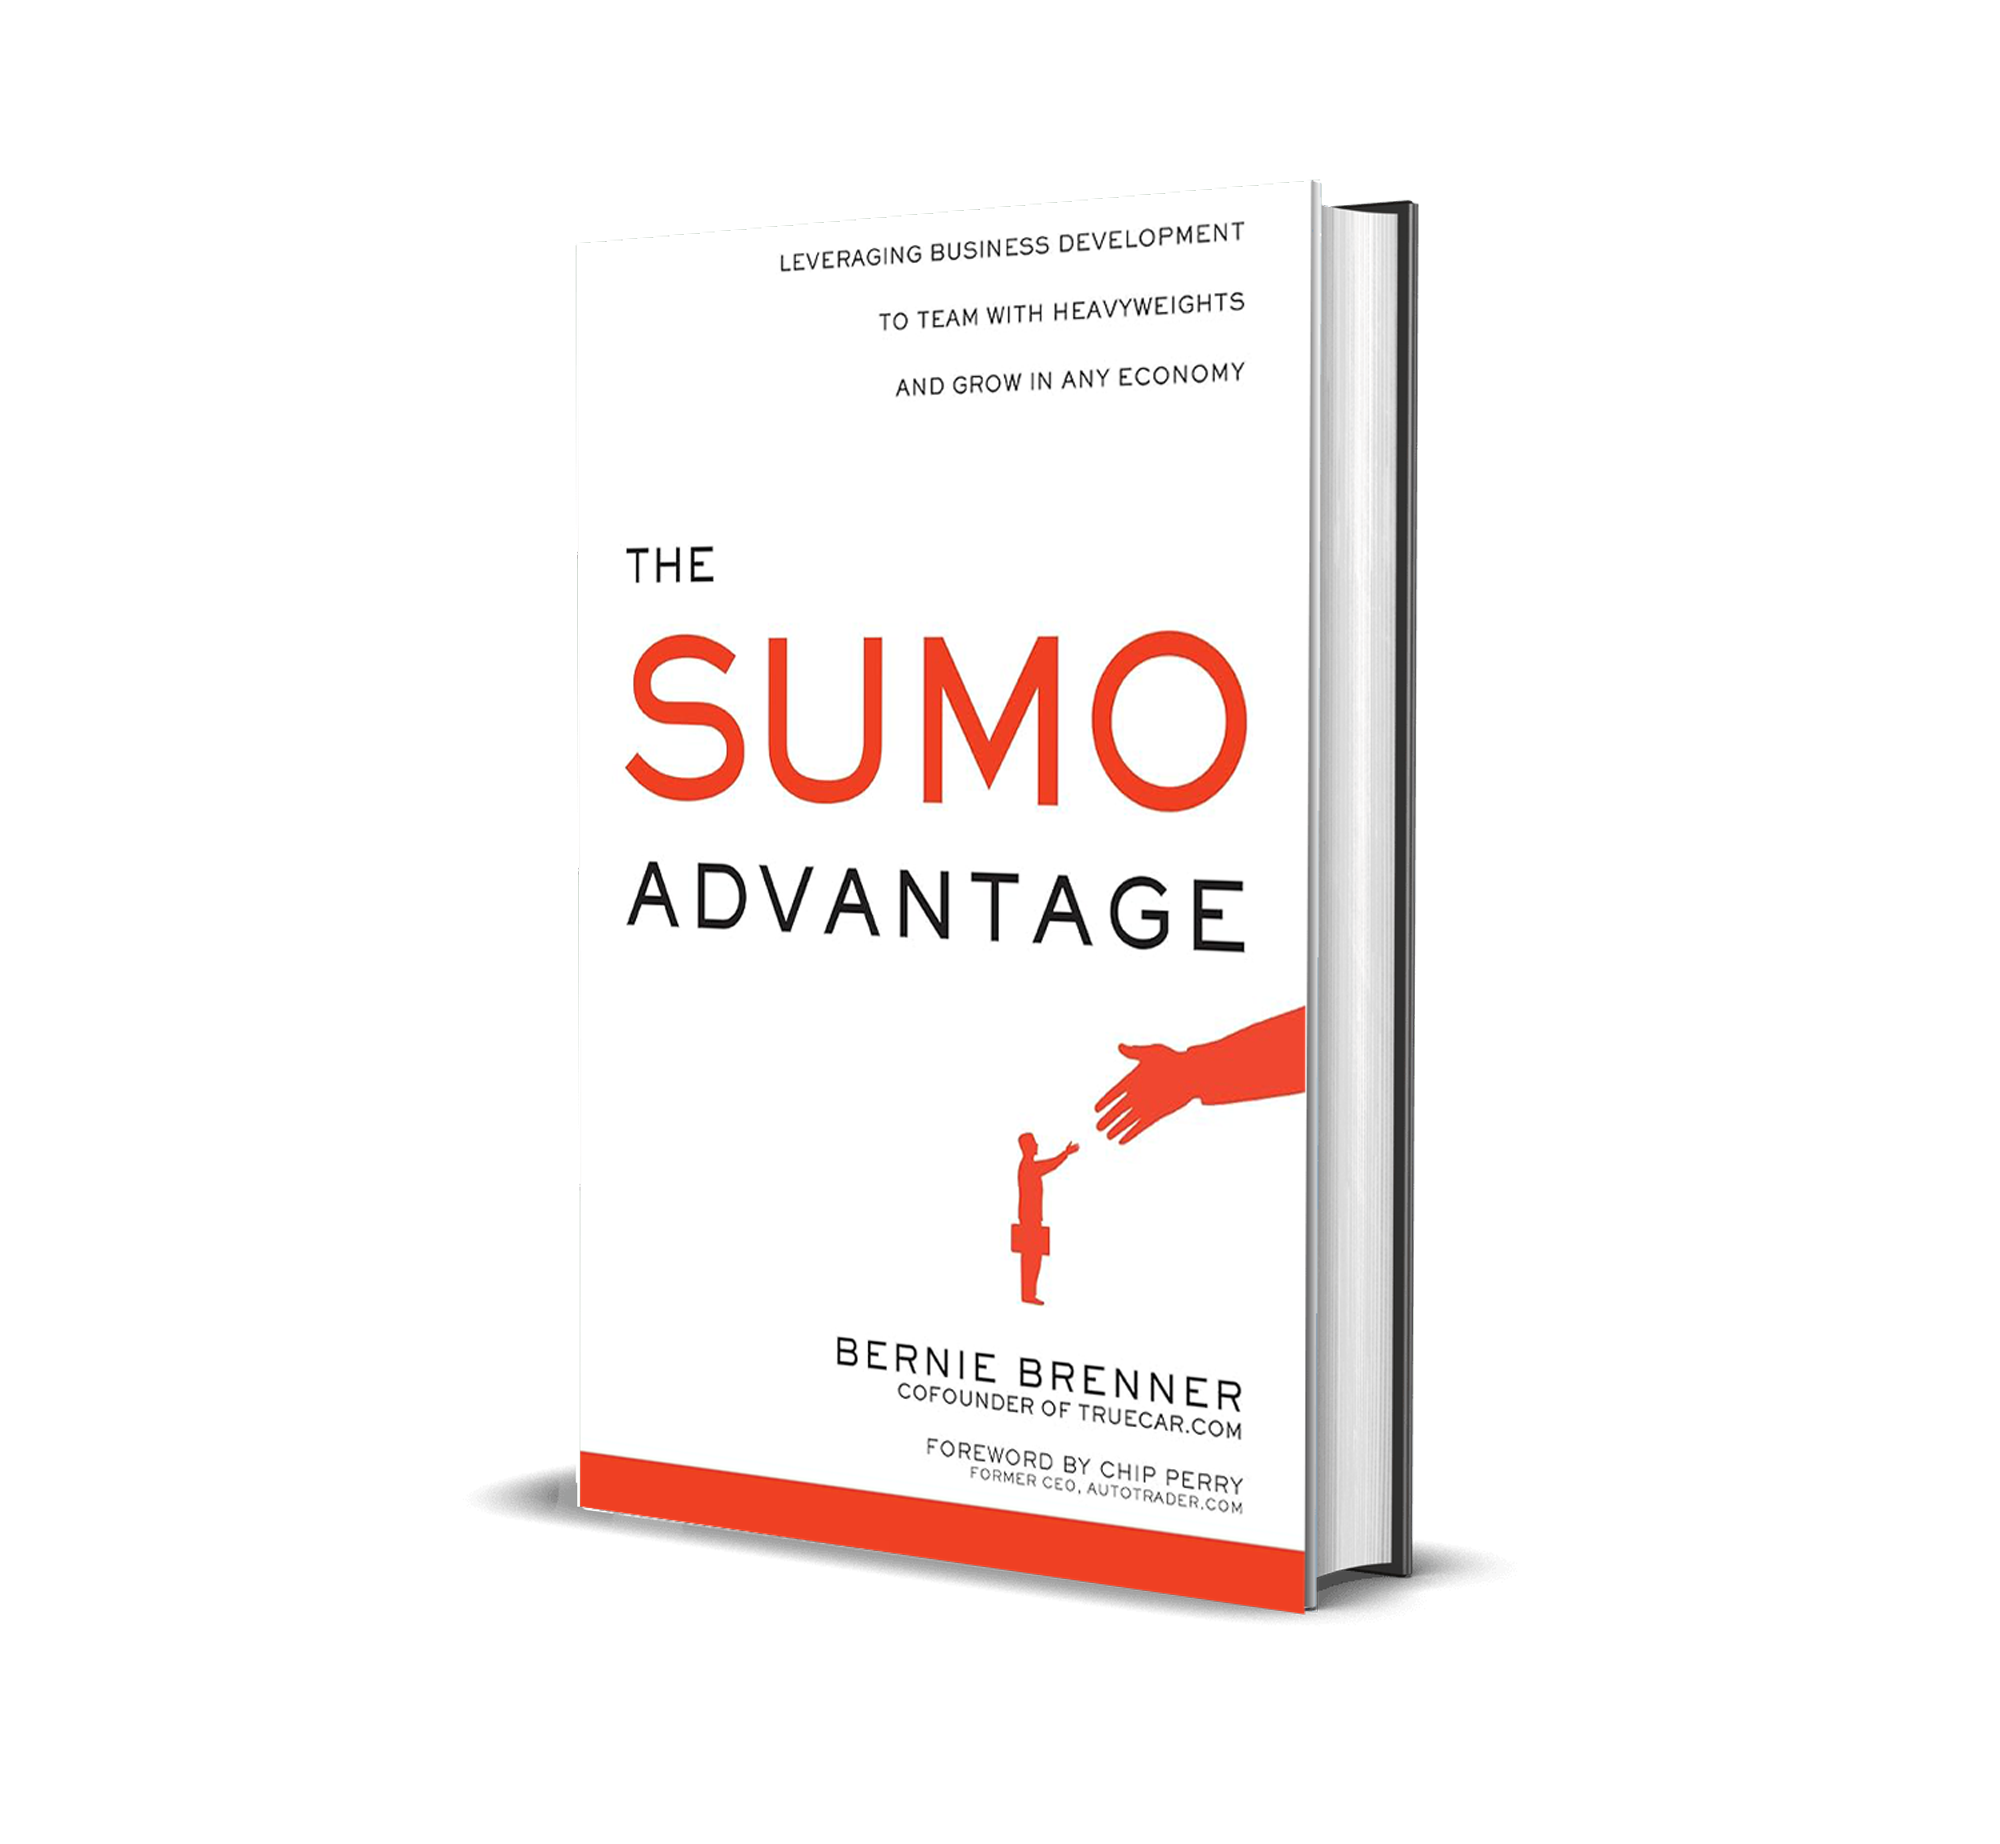 The cover of the business book, Sumo Advantage, by Bernie Brenner